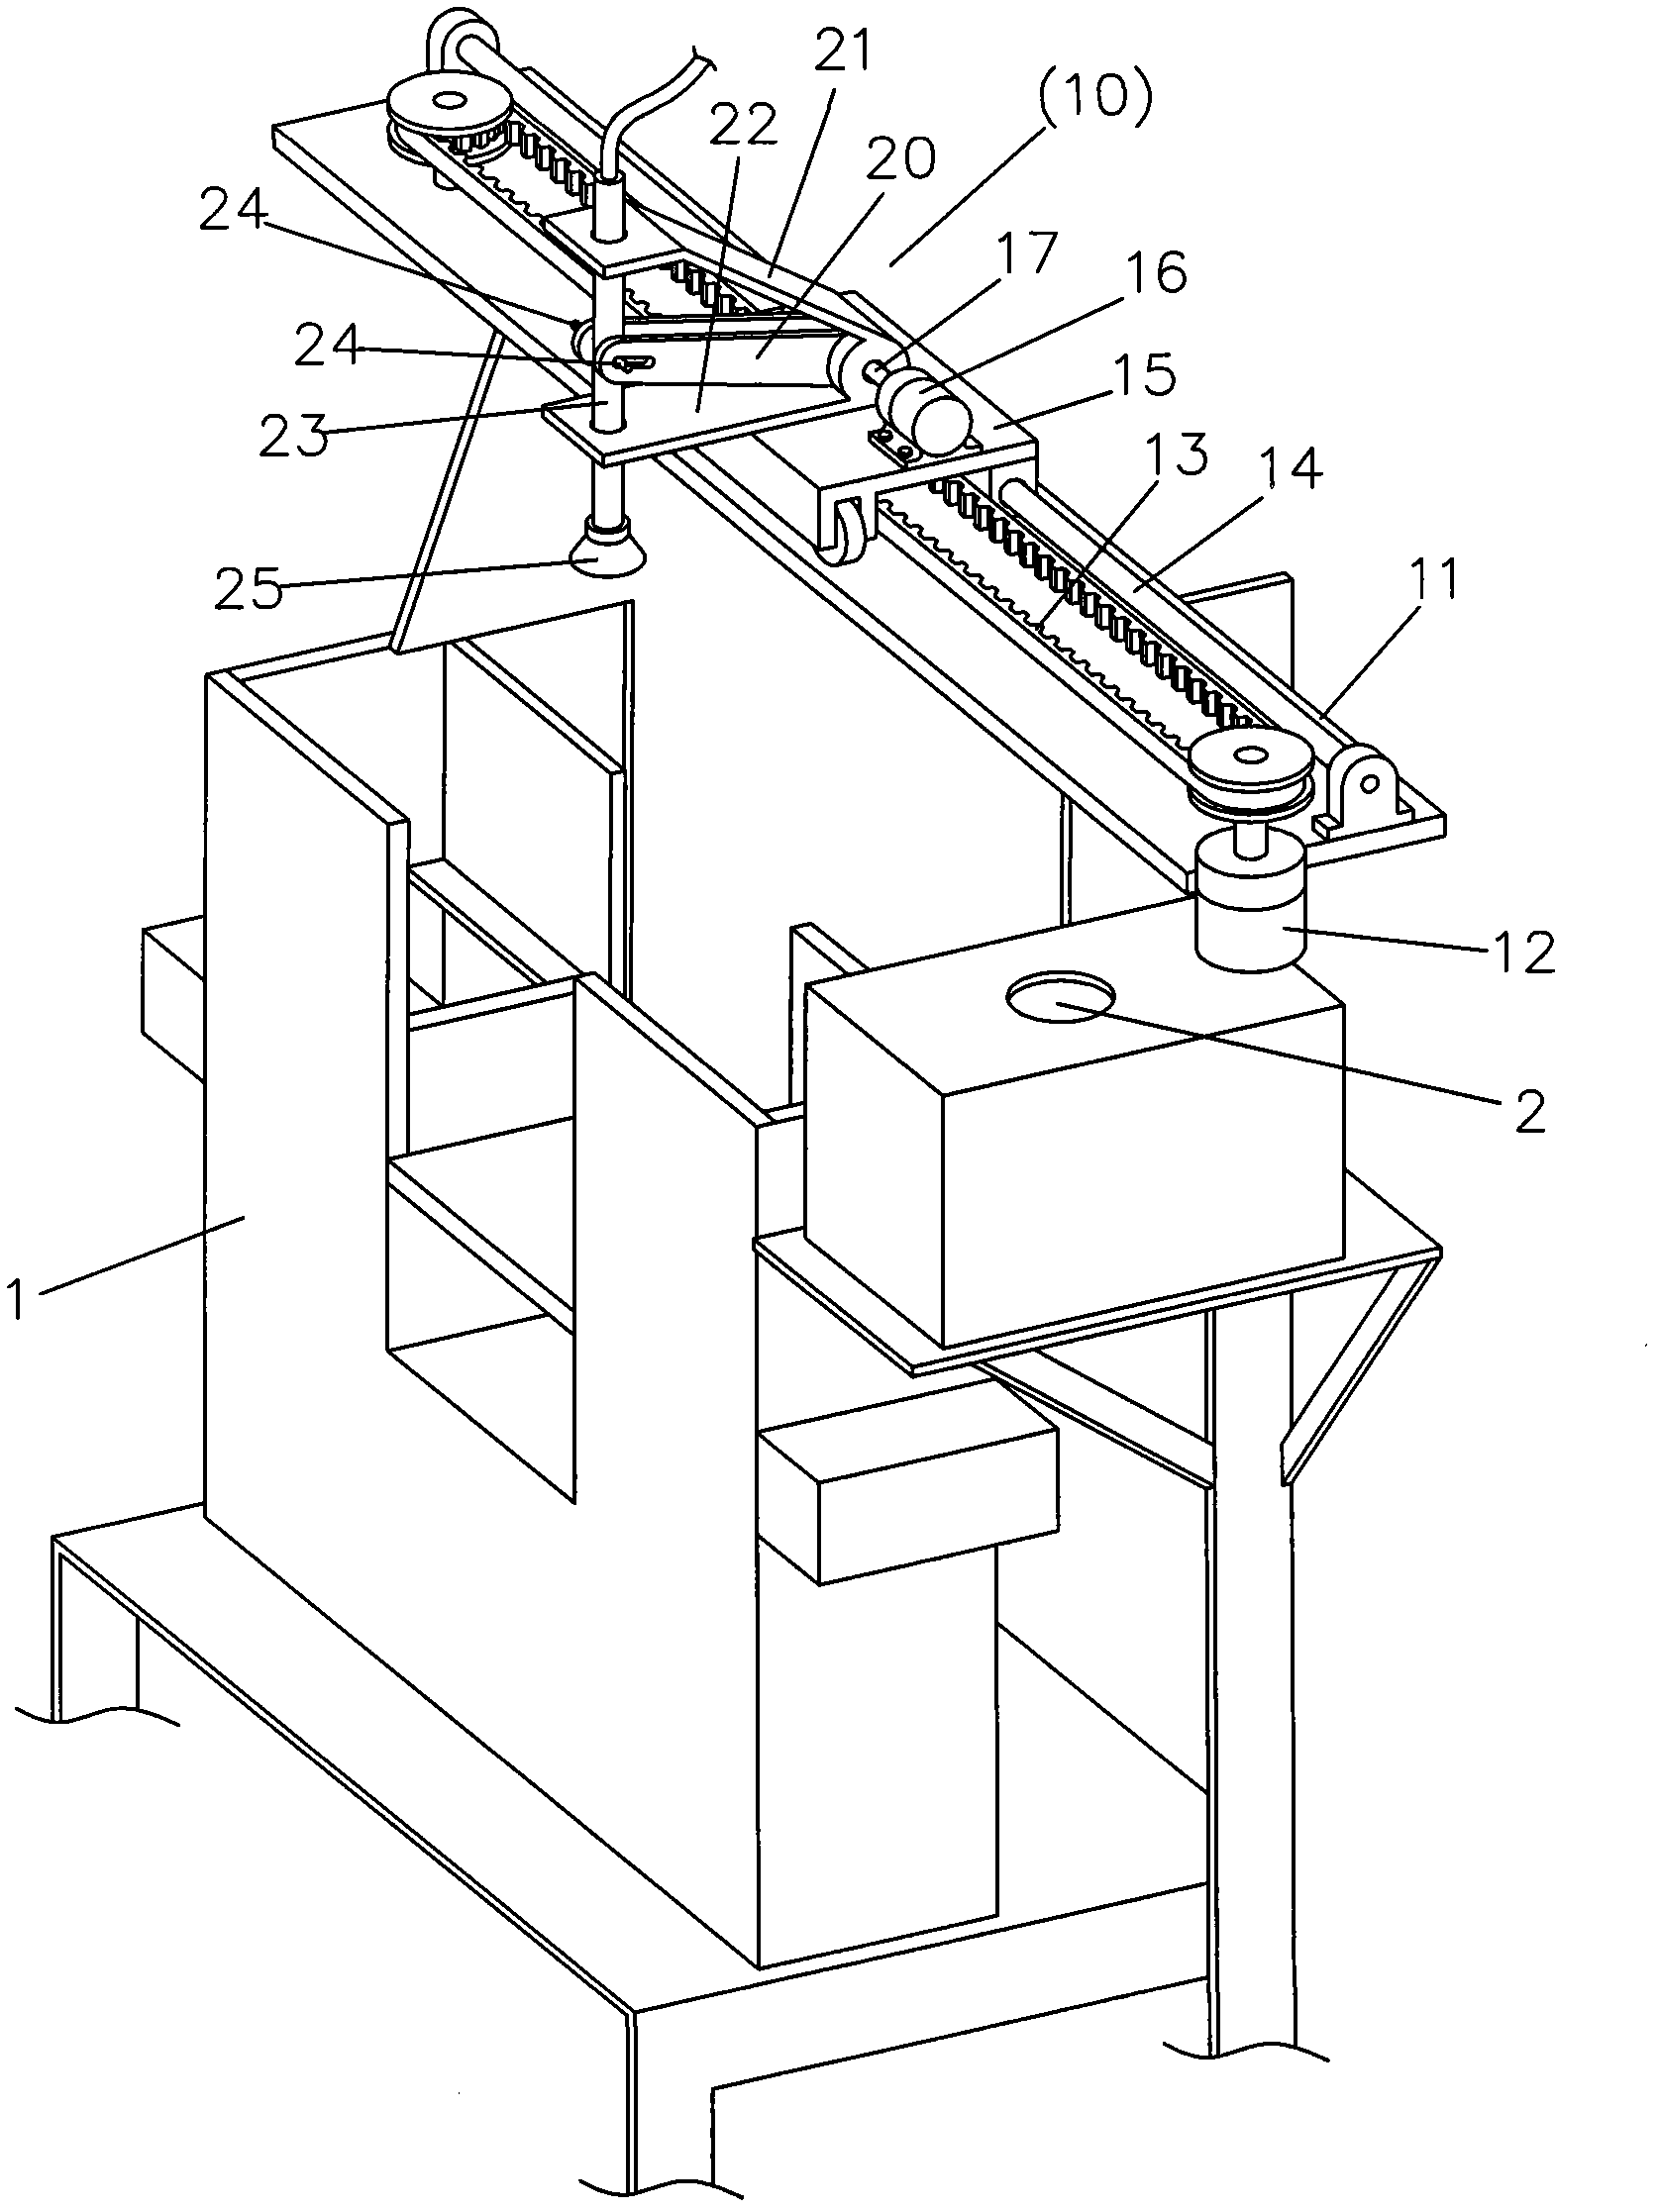 Device for dealing and displaying playing cards